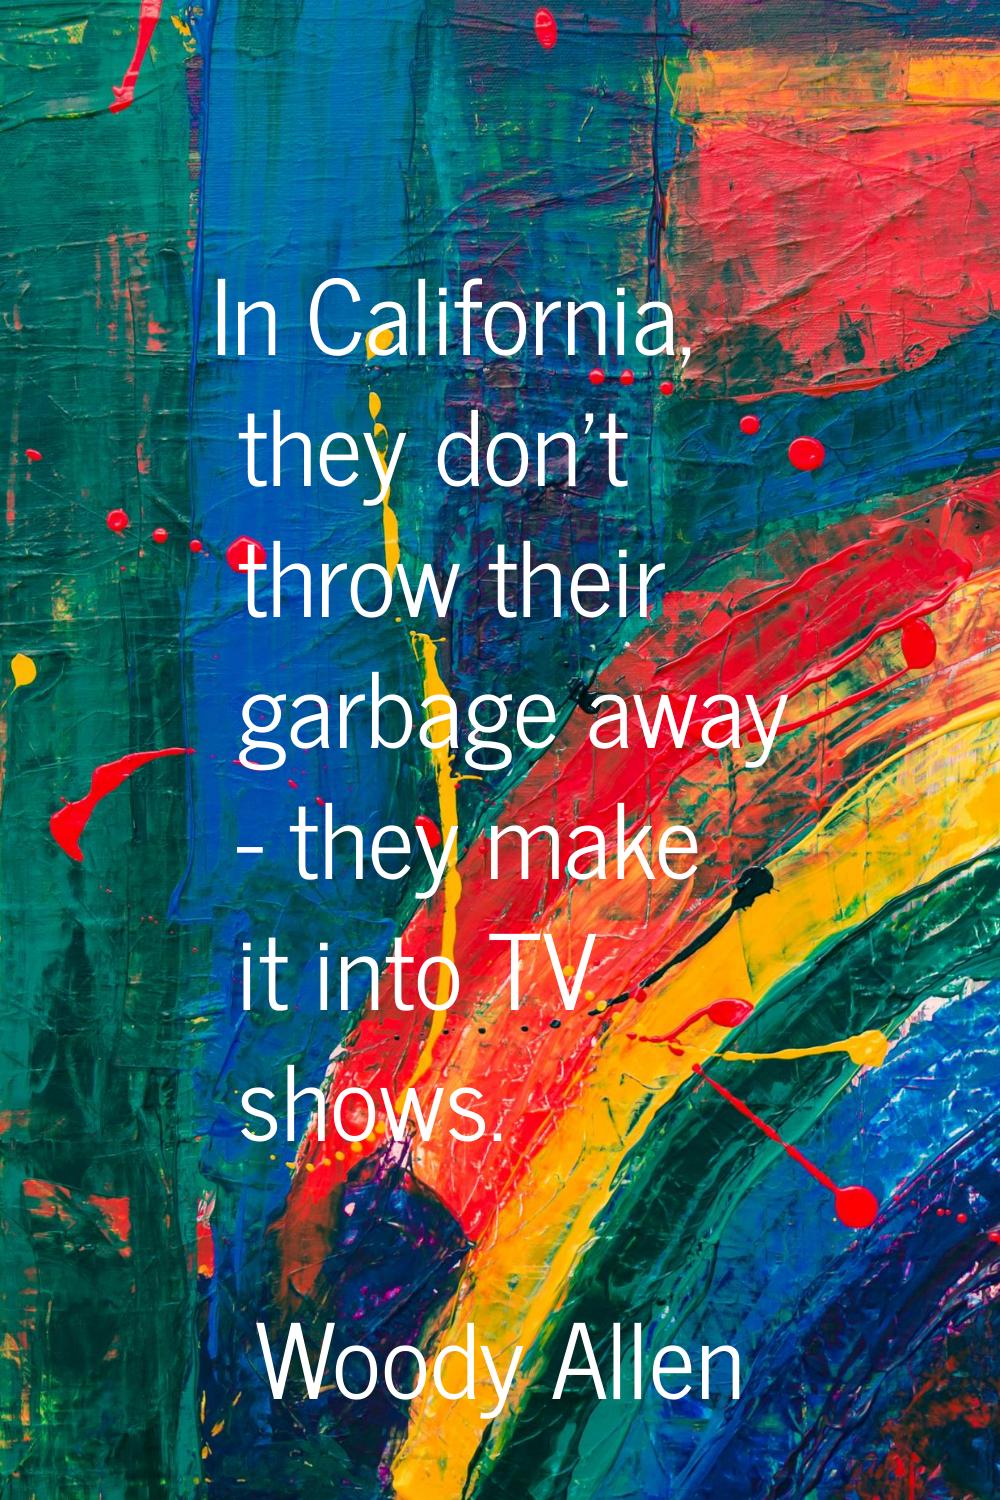 In California, they don't throw their garbage away - they make it into TV shows.